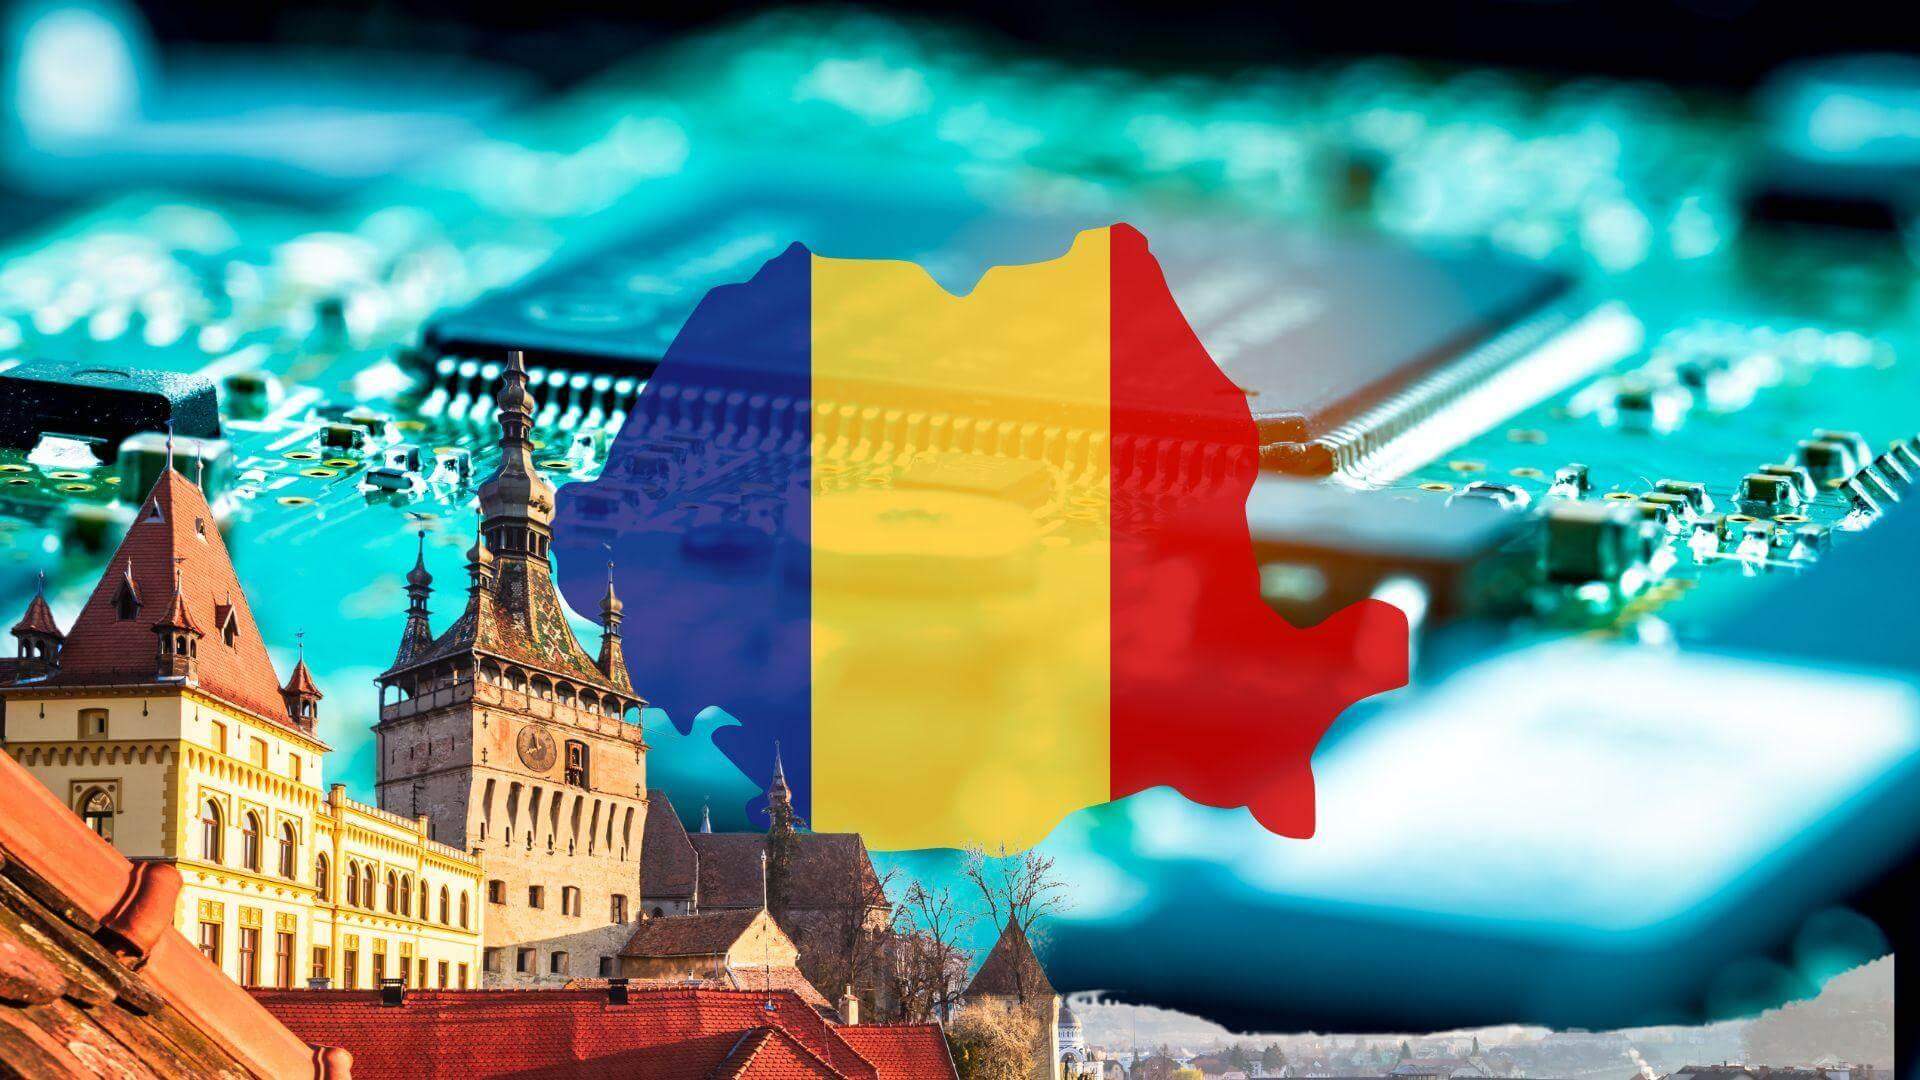 Software Development in Romania: A Cost-Effective and Talented Destination